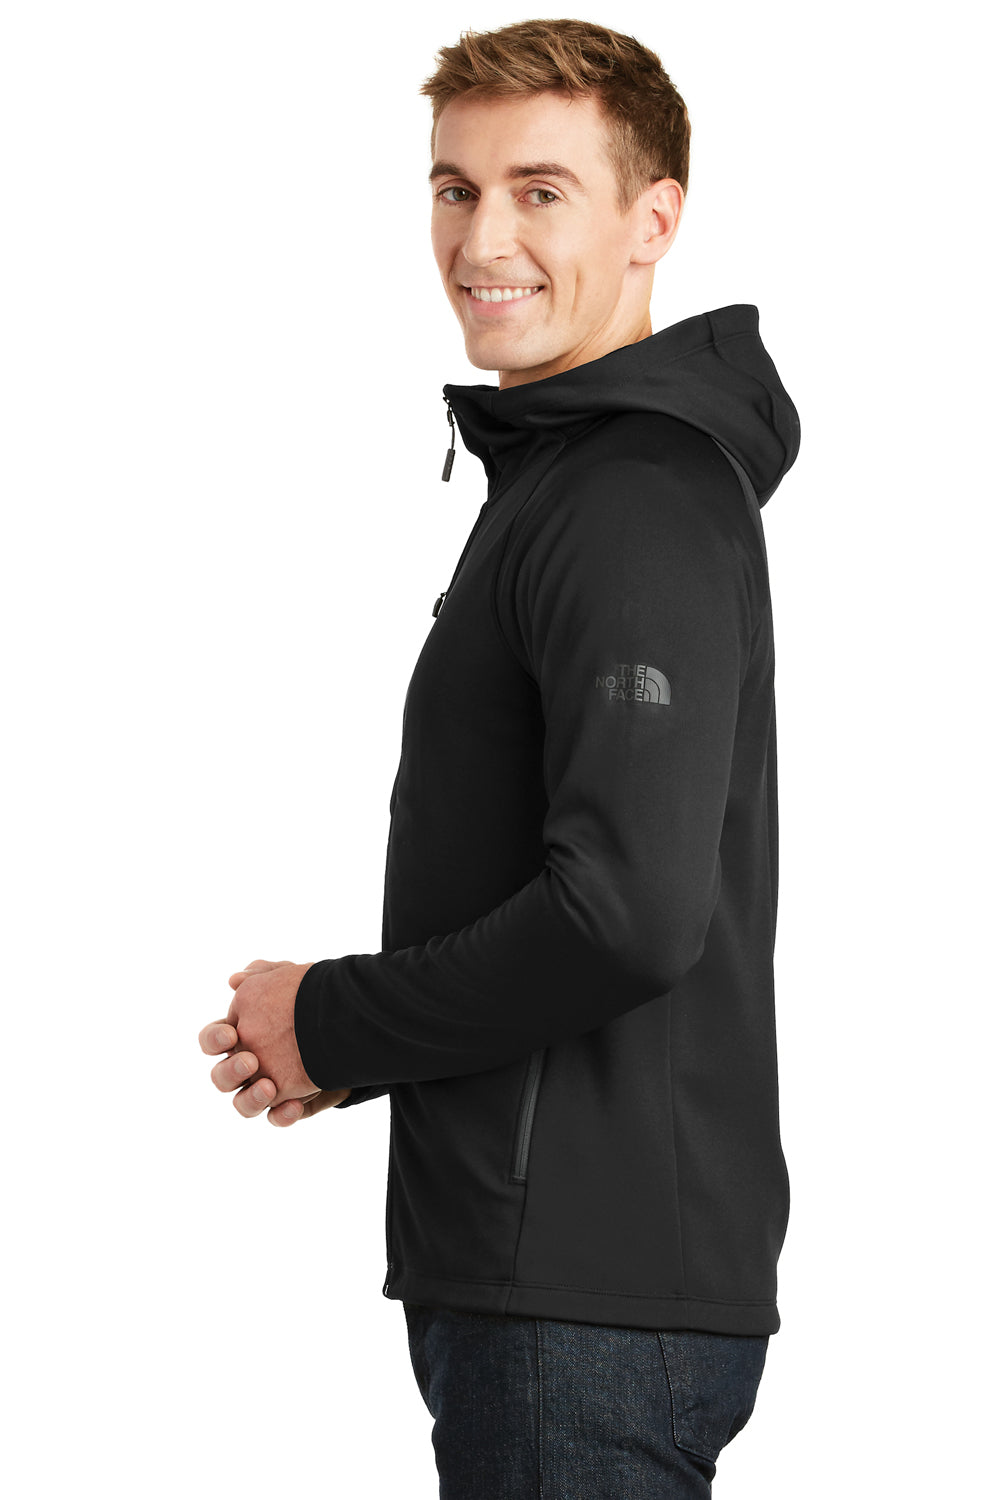 The North Face NF0A3LHH Mens Canyon Flats Full Zip Fleece Hooded Jacket Black Side